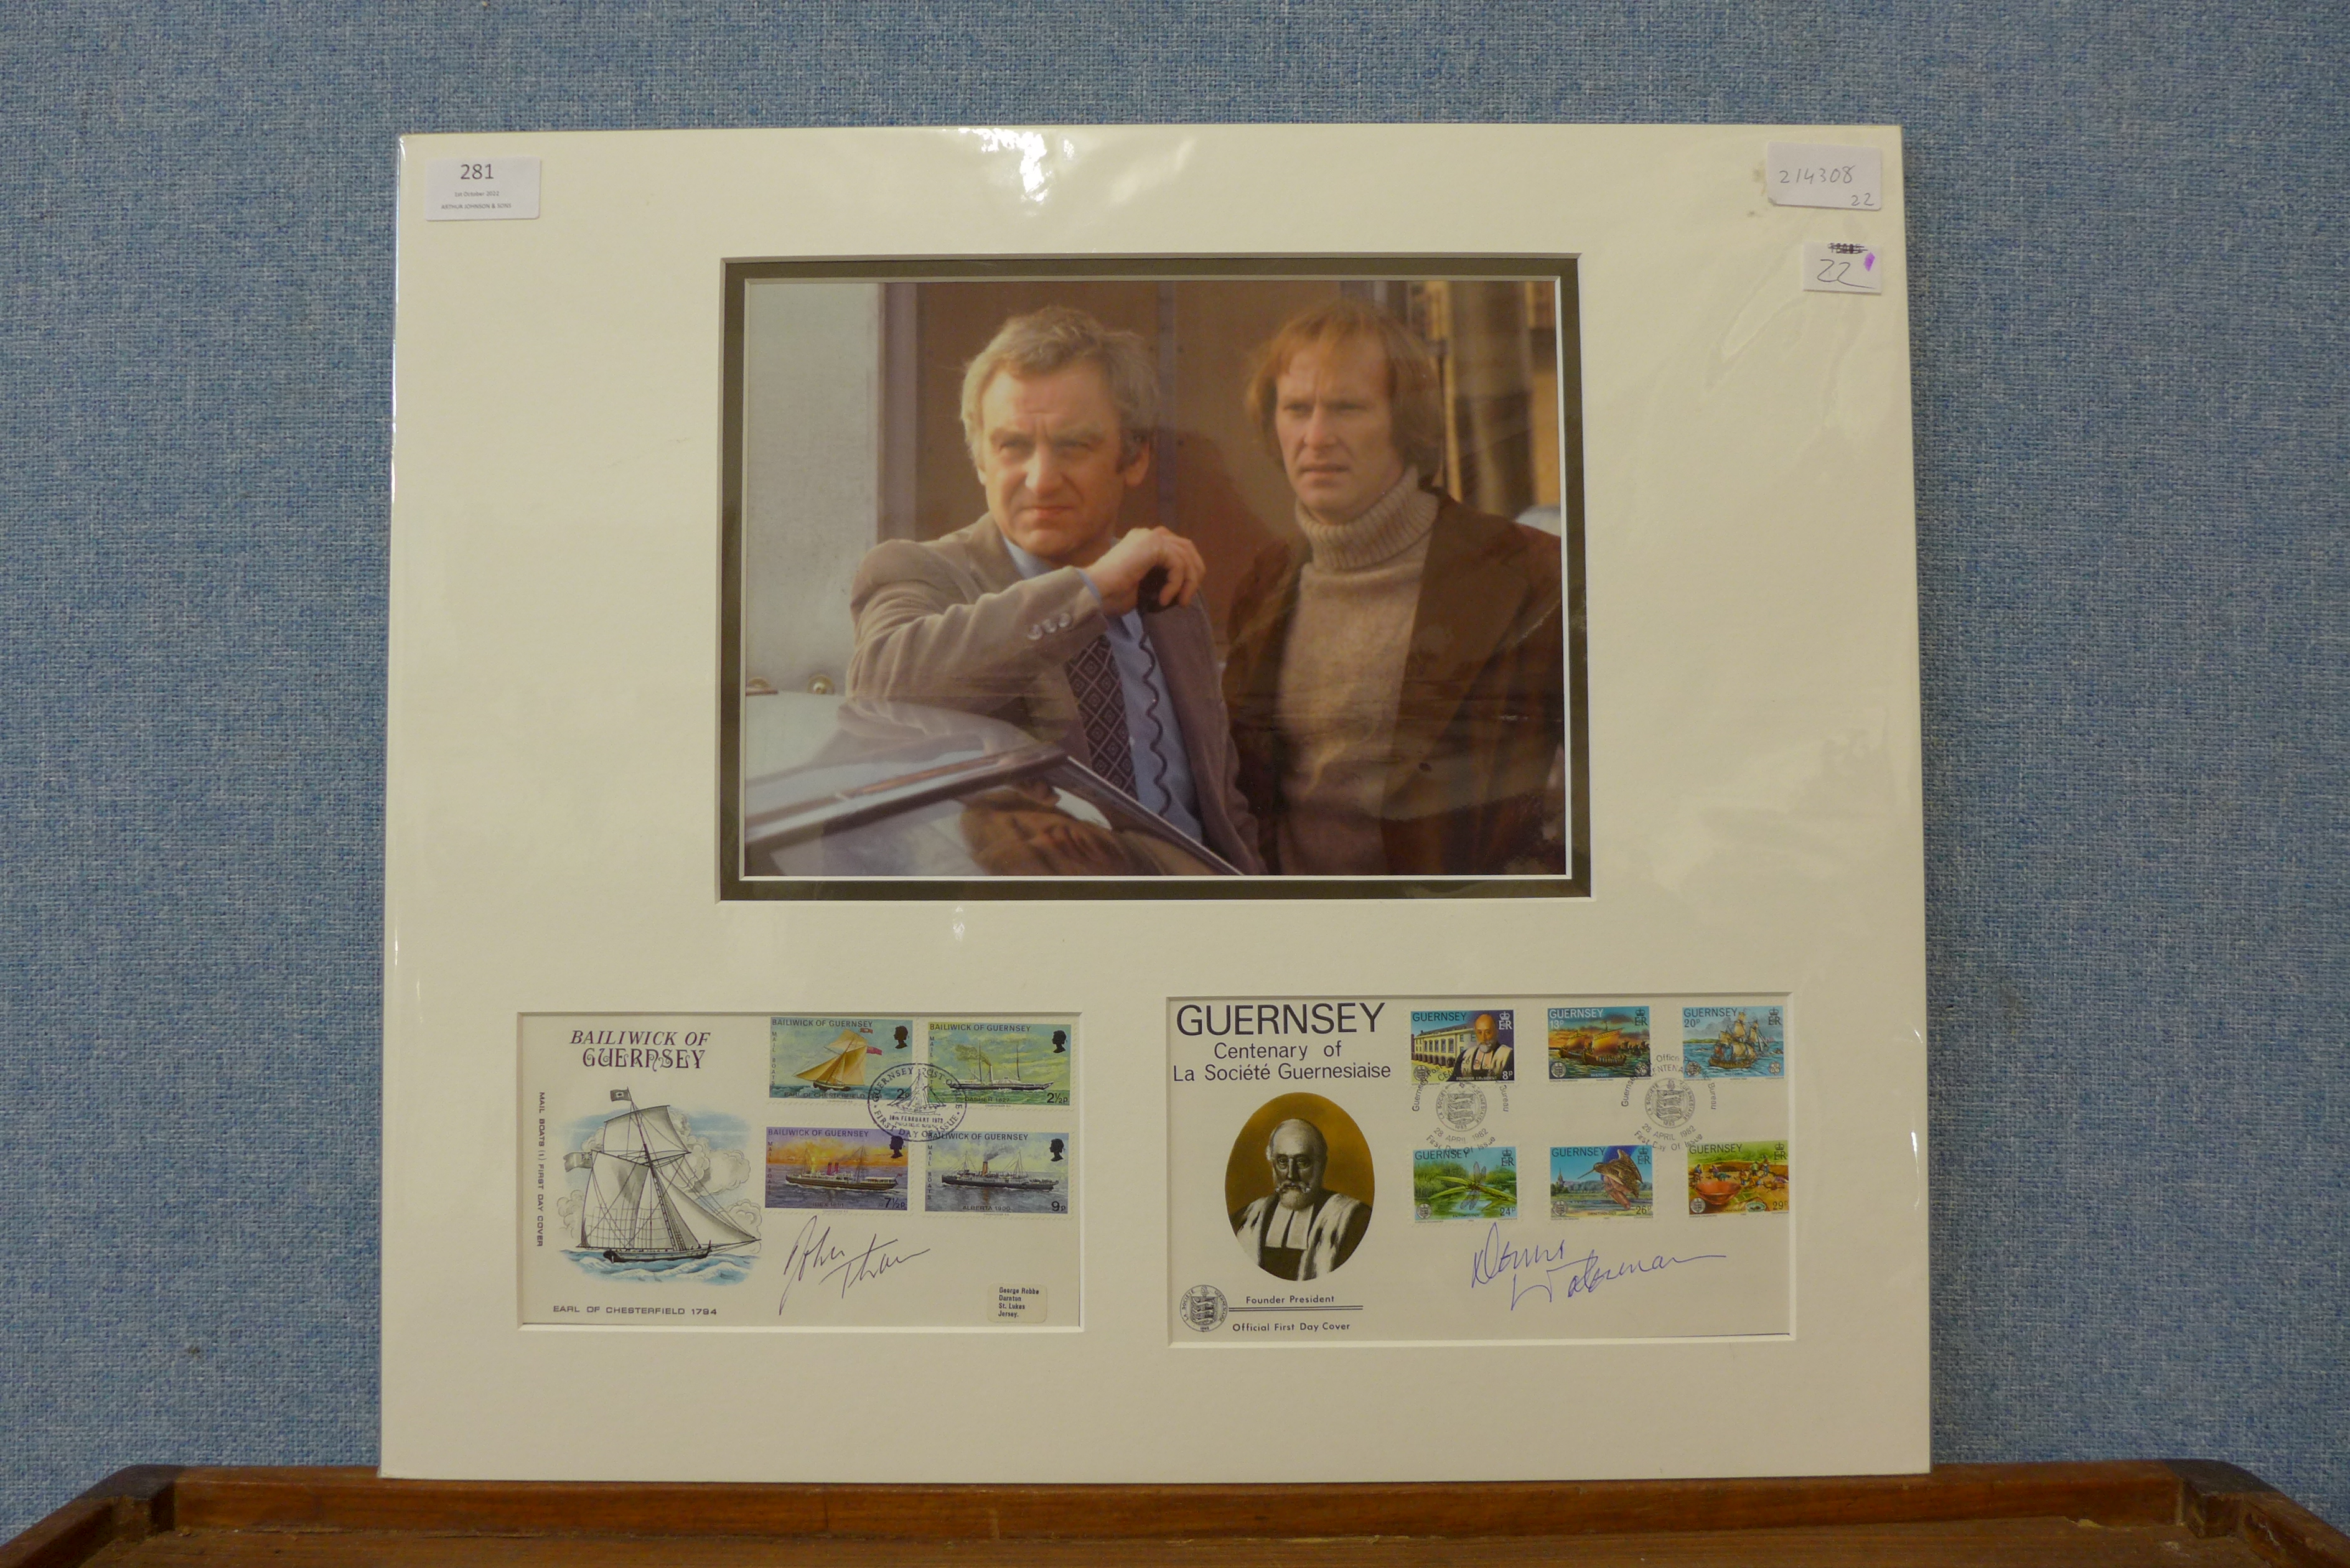 An autographed display, The Sweeney signed by John Thaw and Dennis Waterman